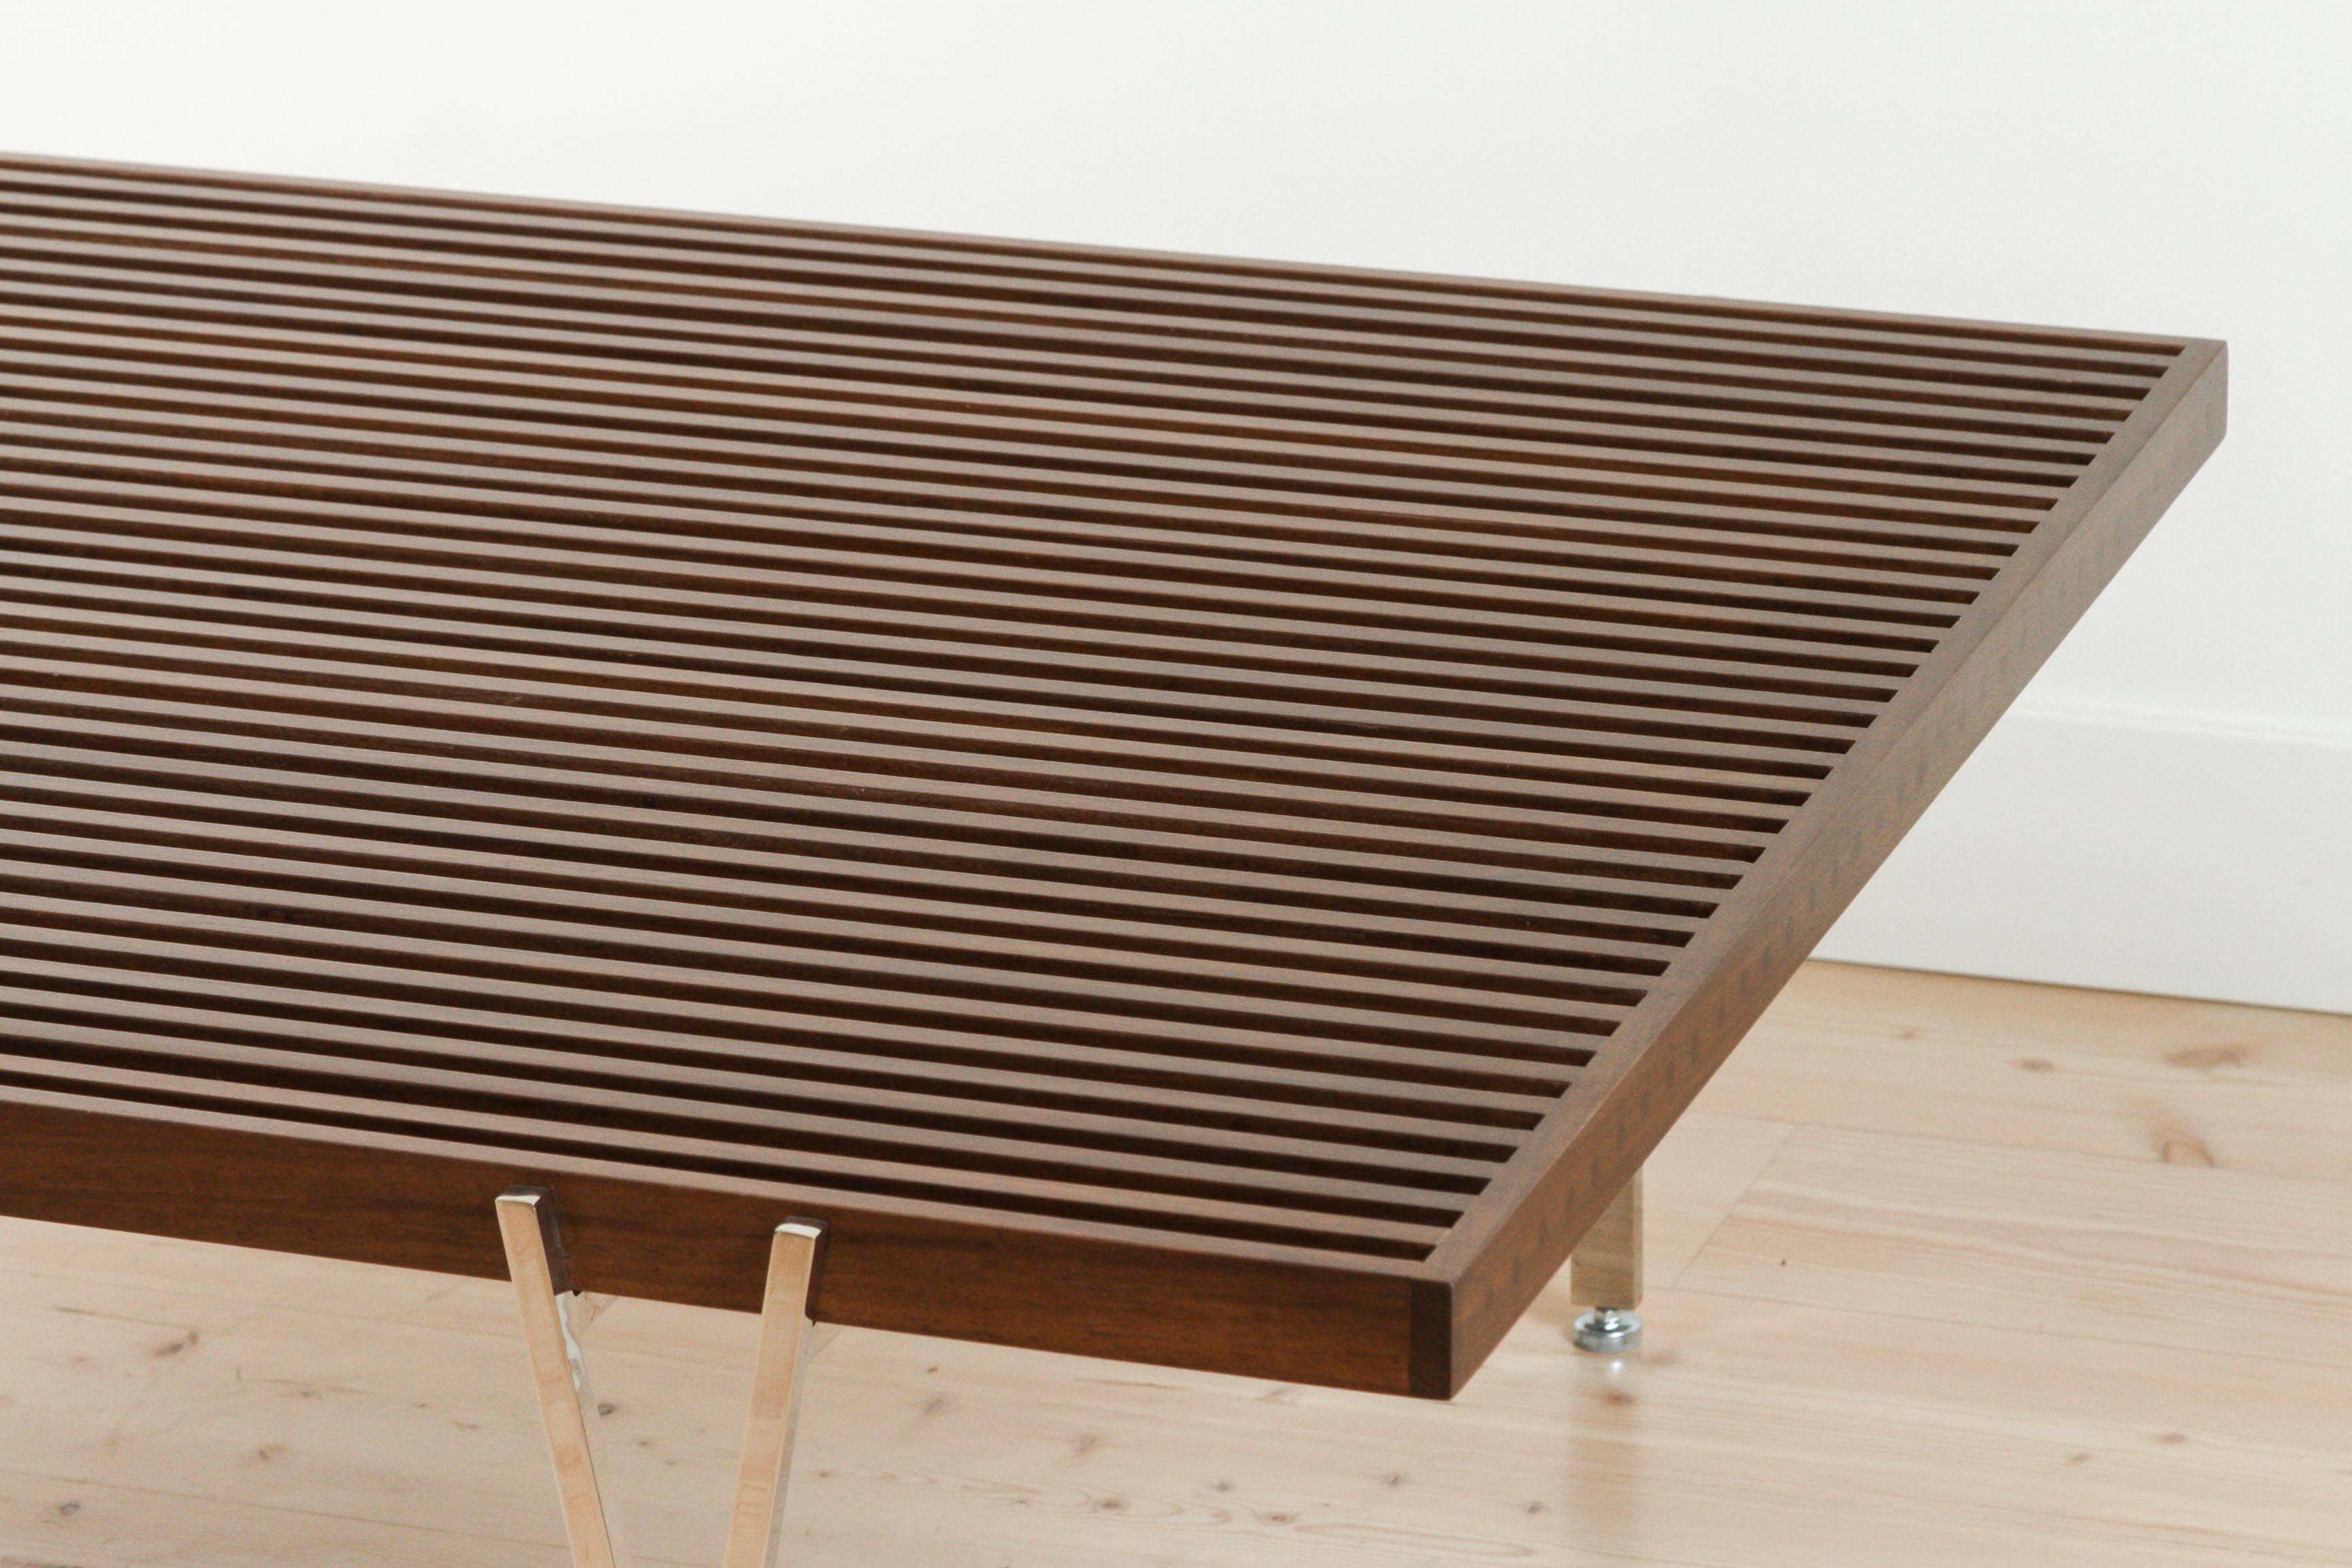 The Y-Leg Coffee Table top is composed of solid American walnut or white oak strips. Both ends of the table have visible dowel joinery which adds to the handcrafted feel and the strength of the table. The plated steel base comes with adjustable